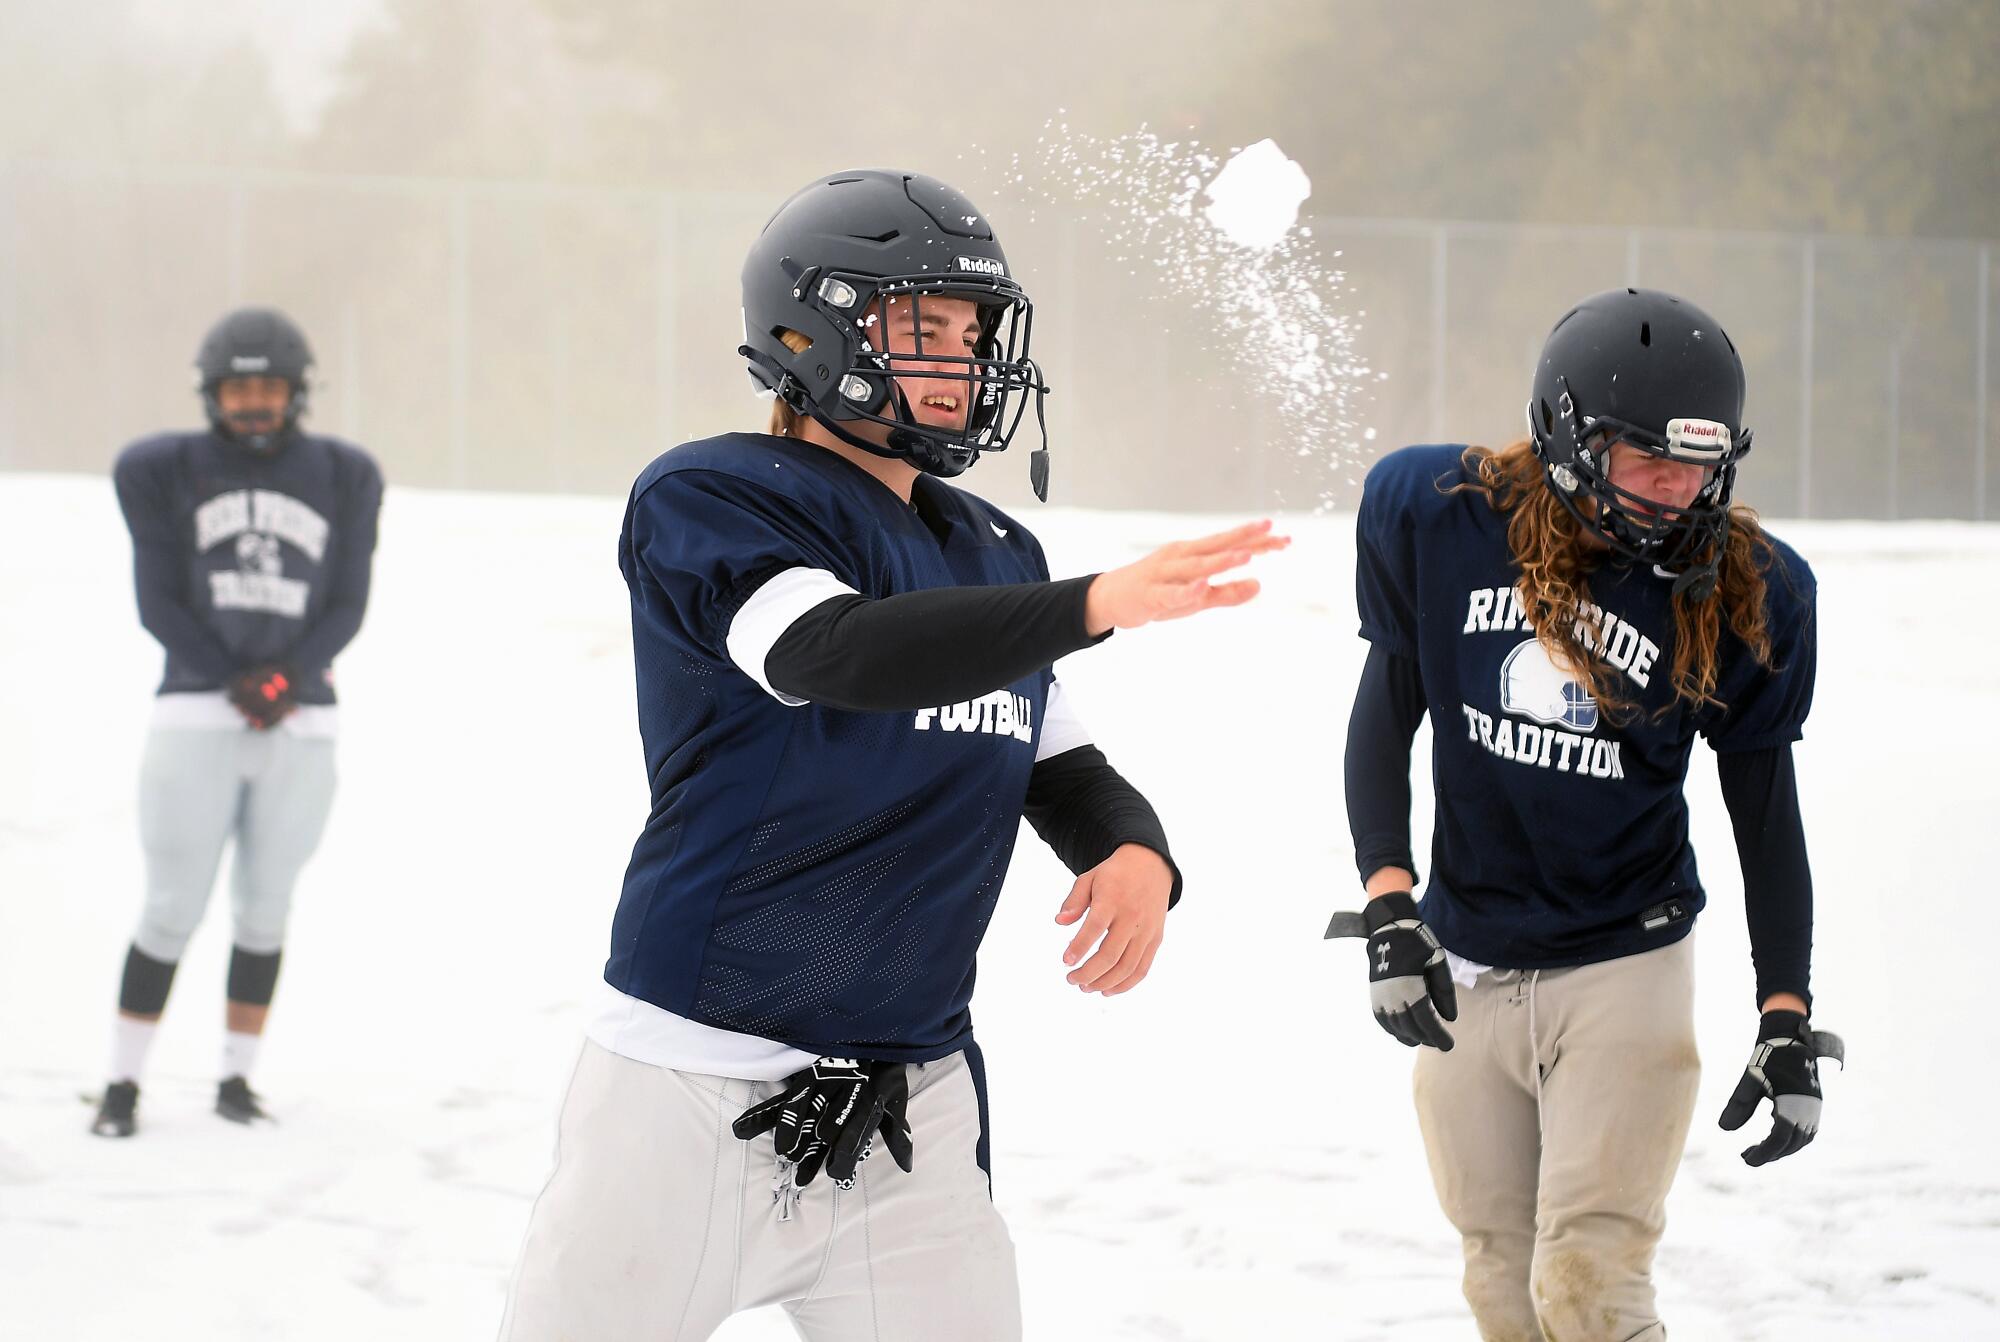 Damon Lyons, center, throws a snowball before practice.